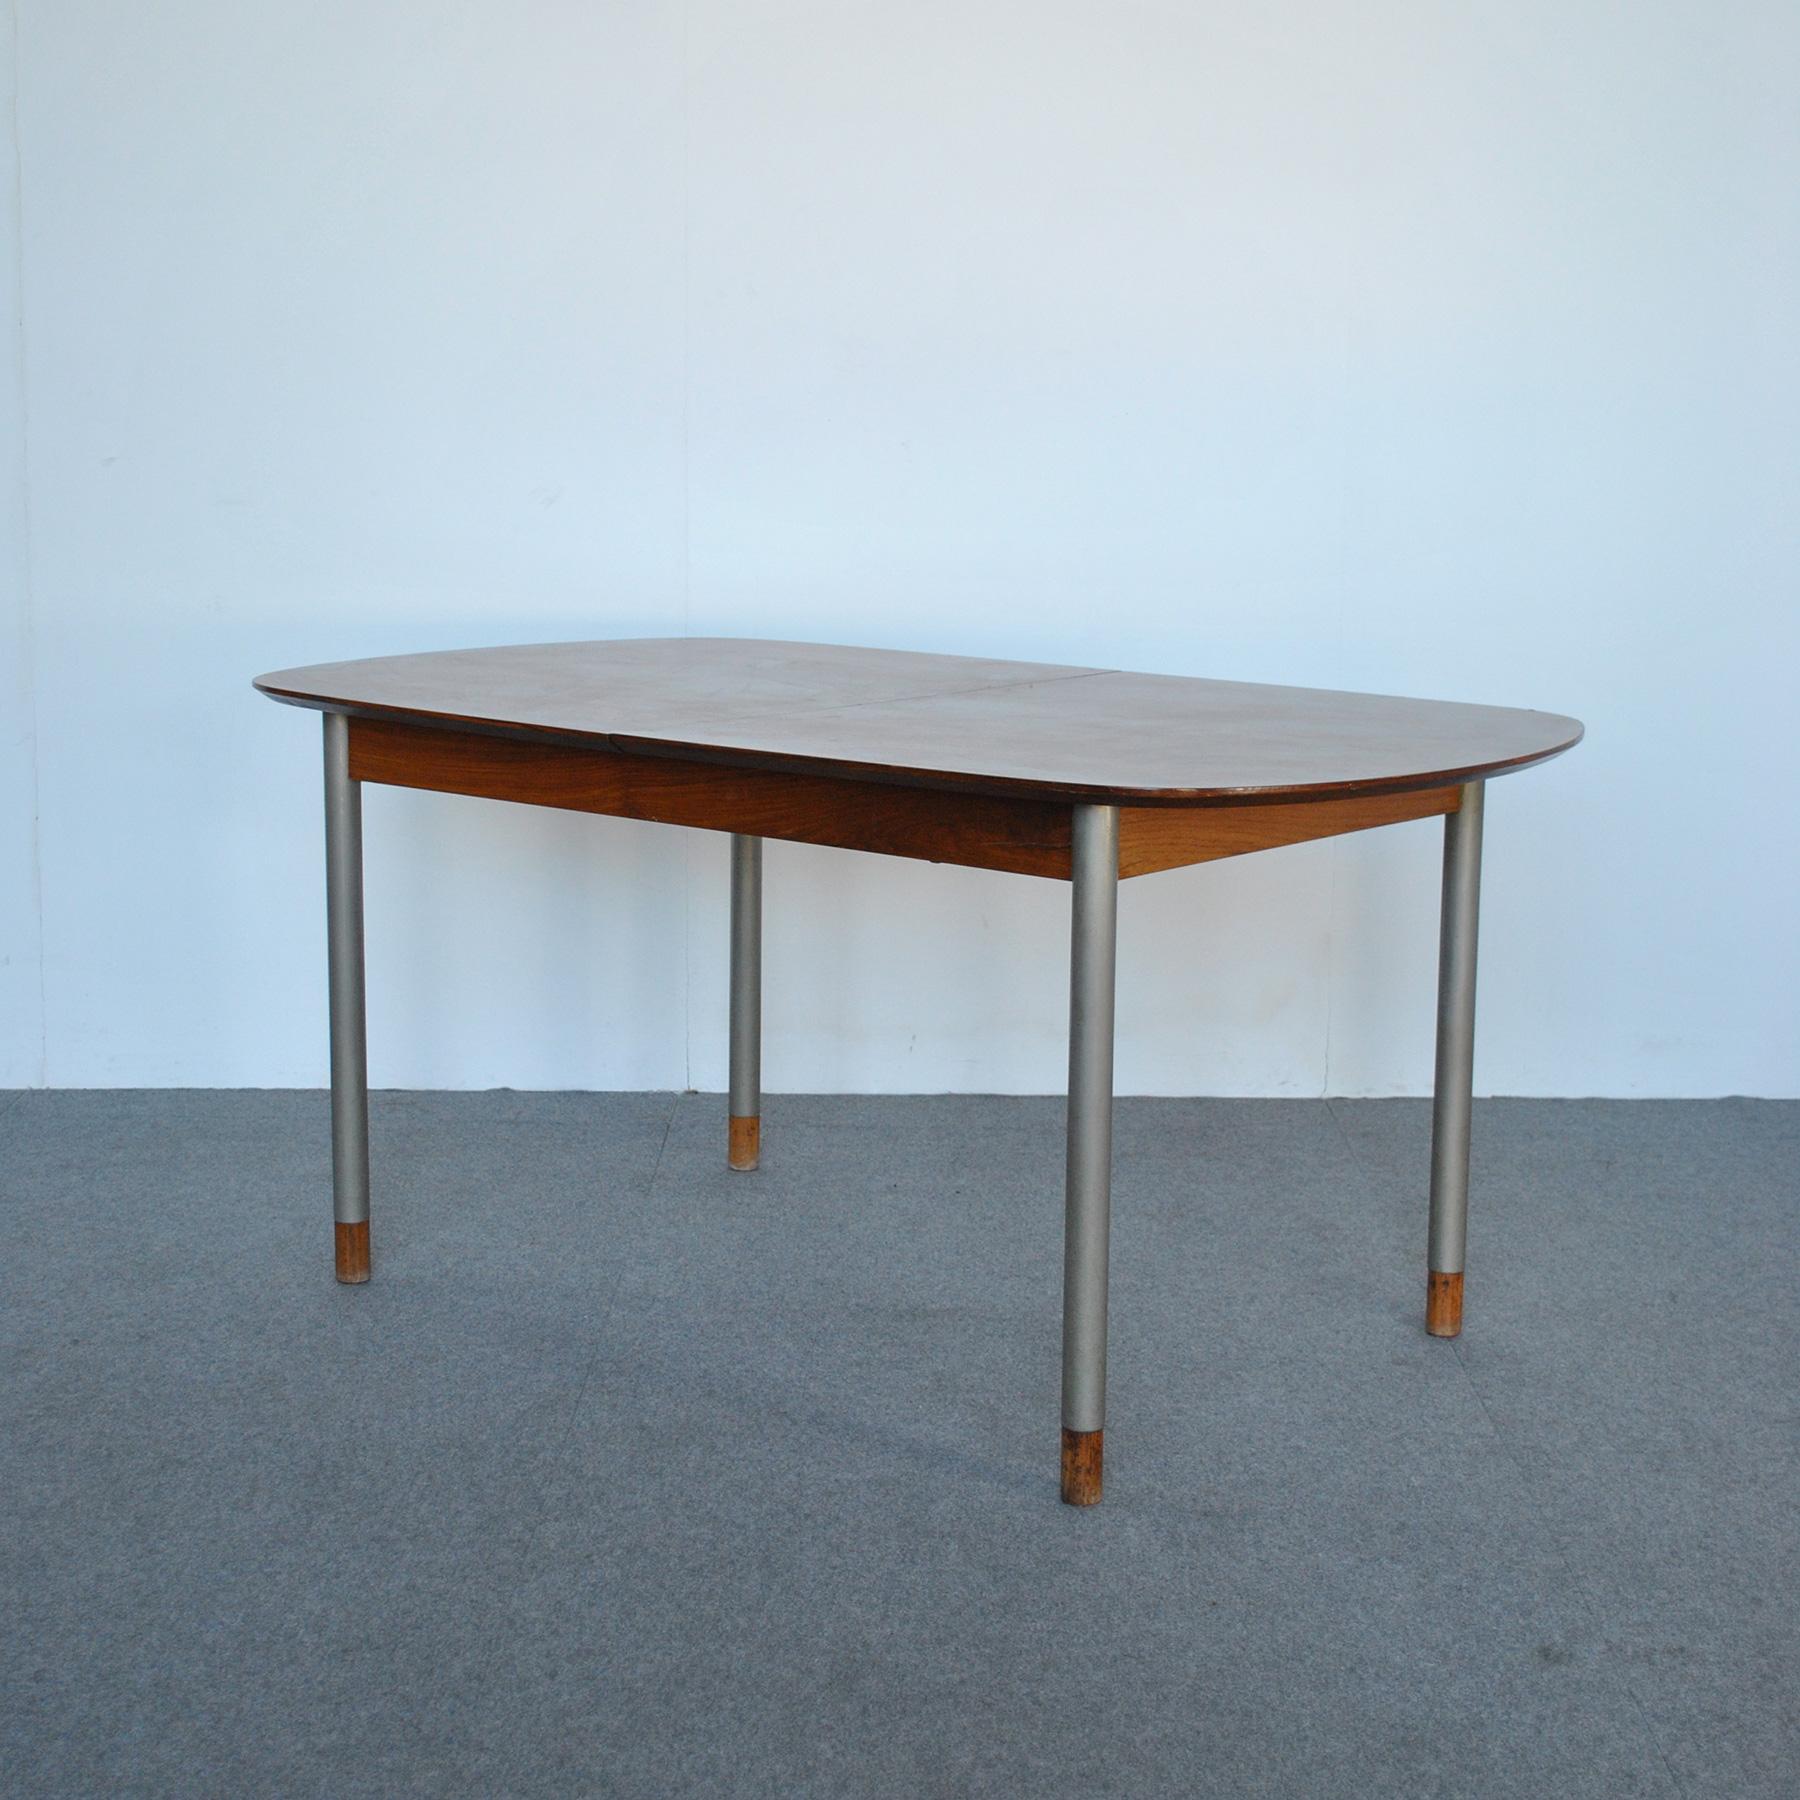 Table with openable wooden top and metal legs with wooden ends, design George Coslin, 1960s production. 
The open table maximum length 215 cm.